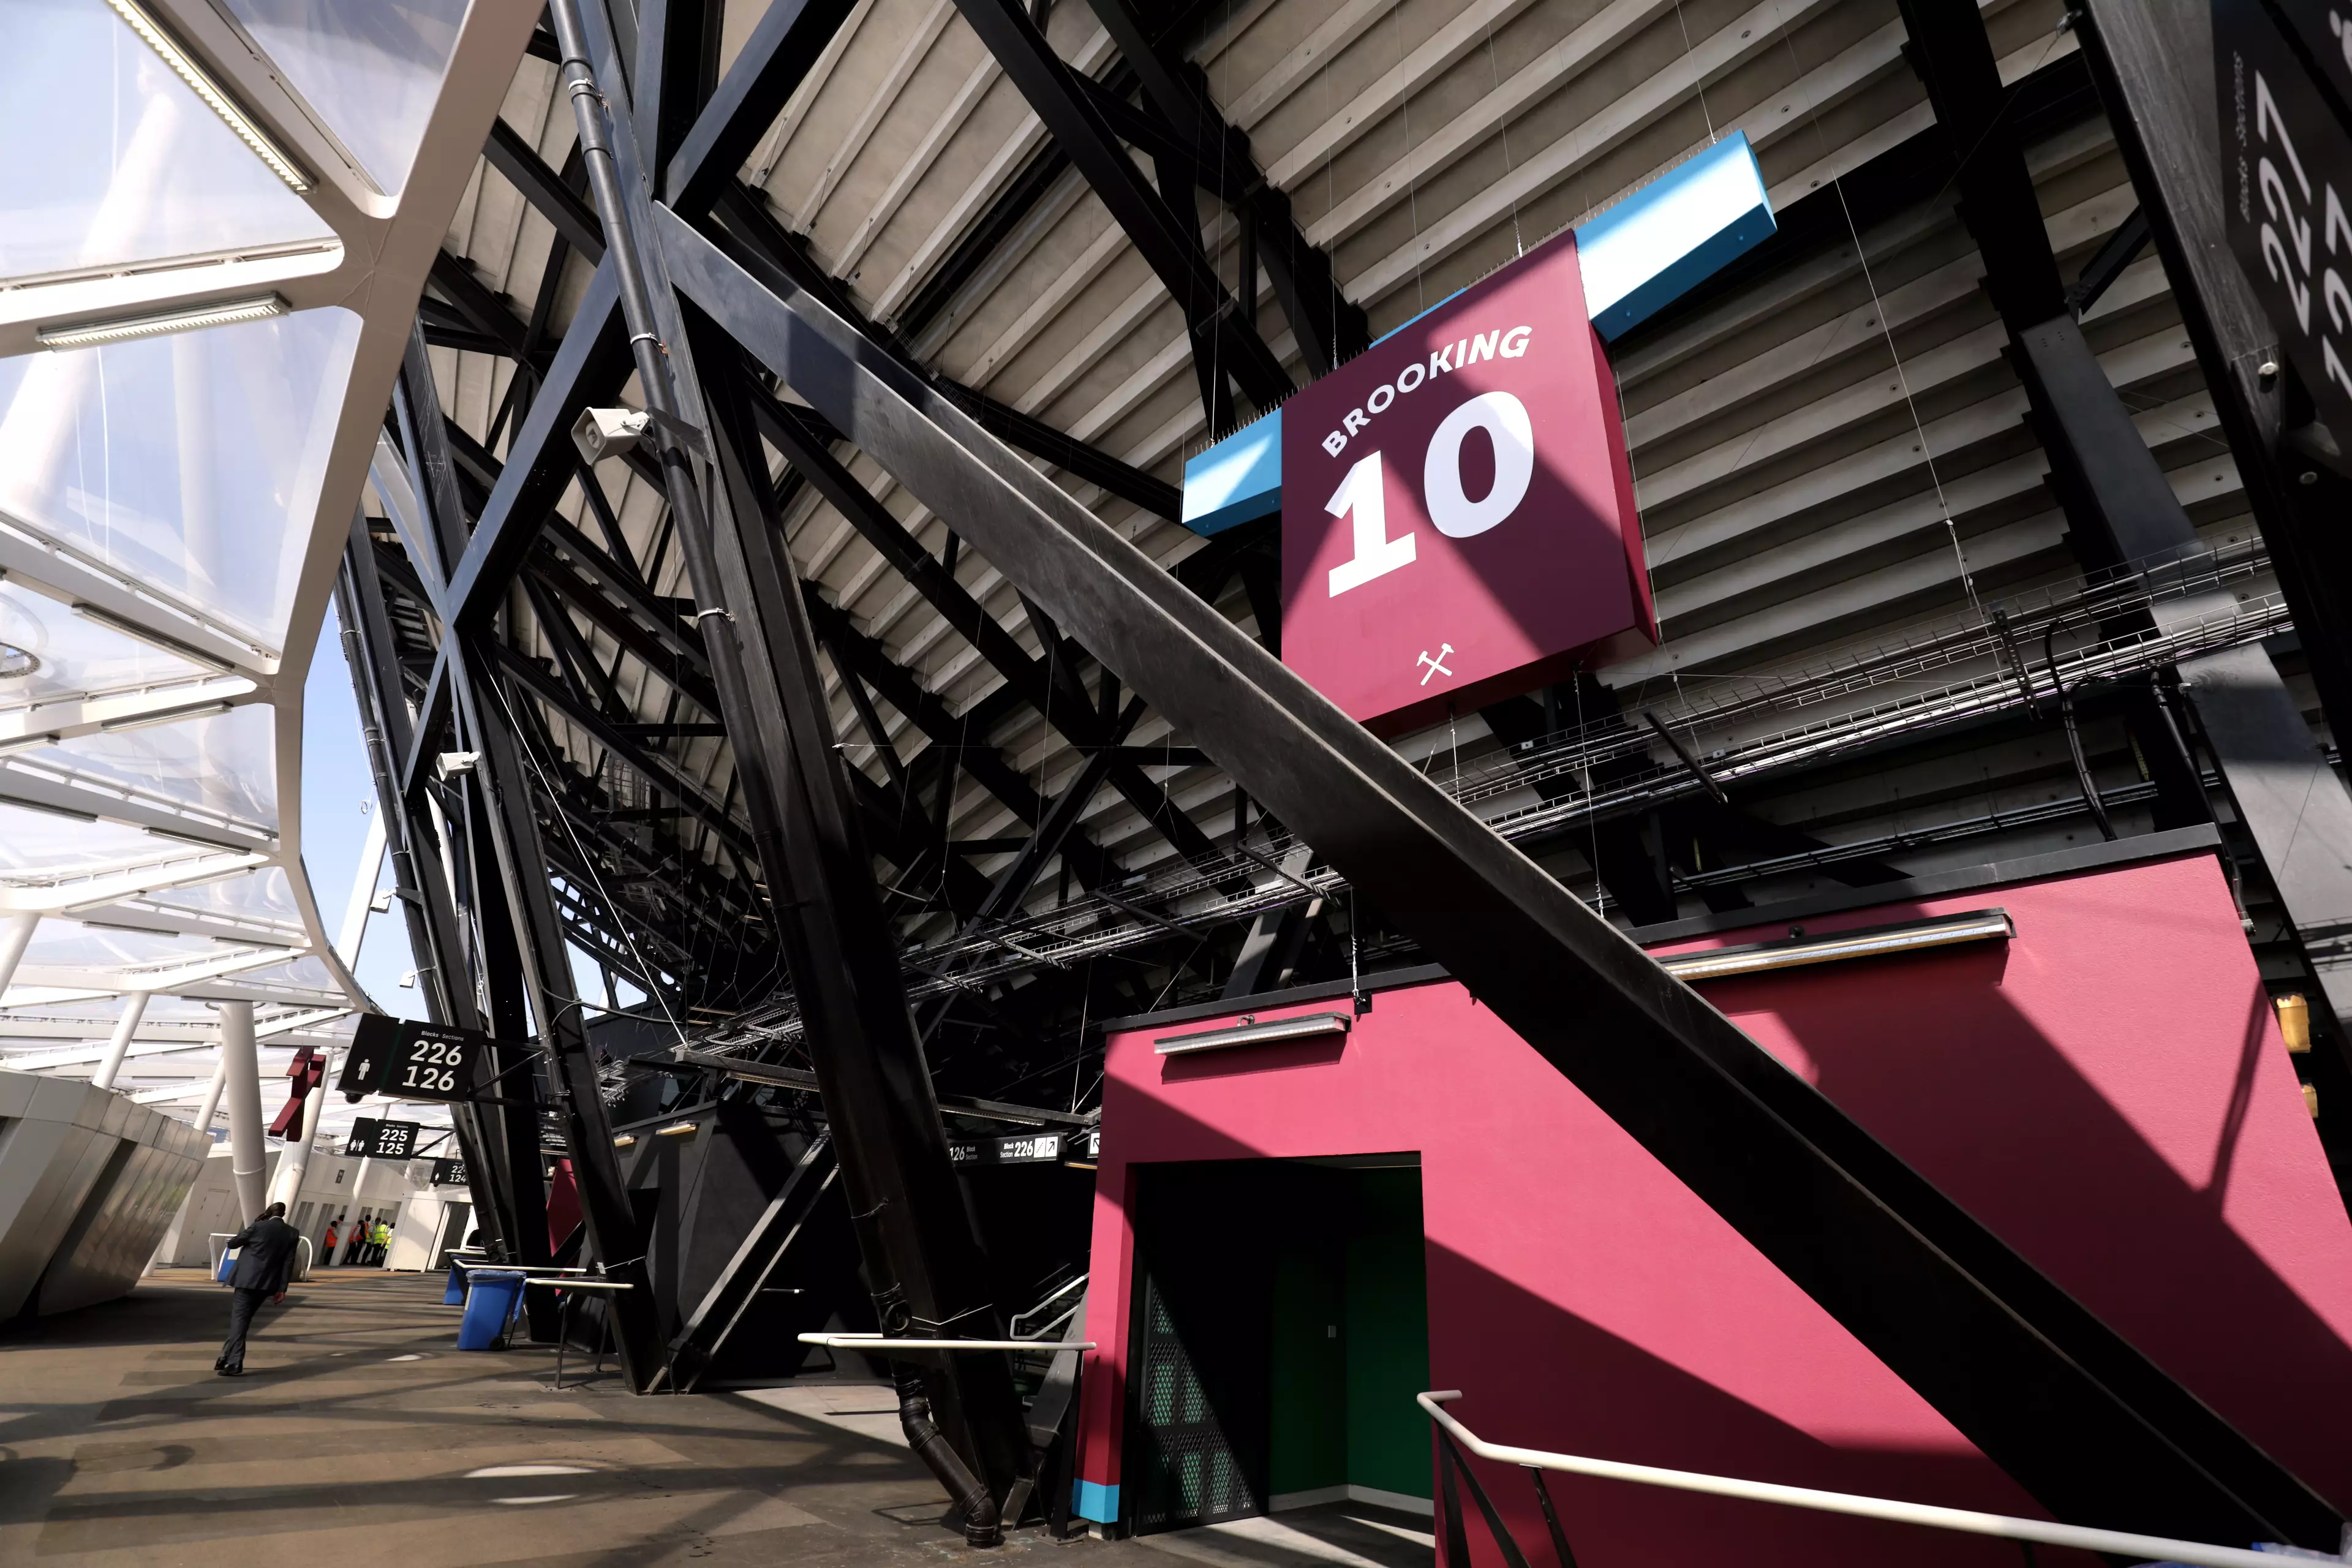 Take A Look Inside The Olympic Stadium